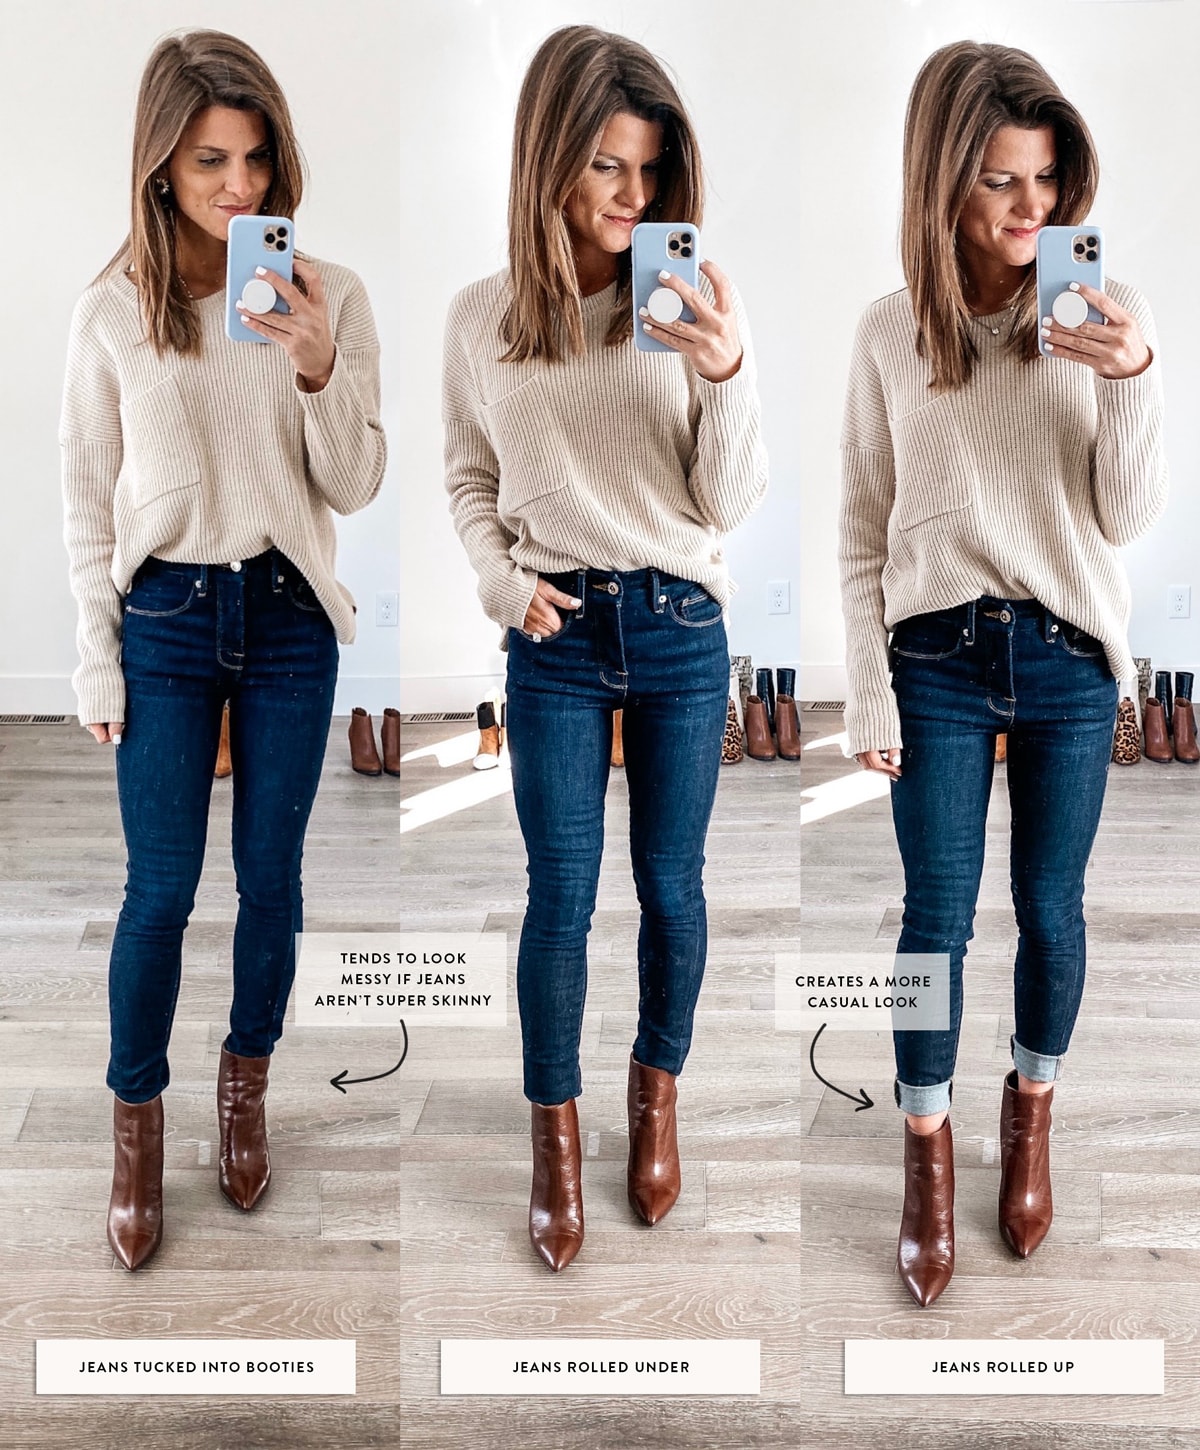 how to know whether to tuck your jeans in or roll them up when wearing booties